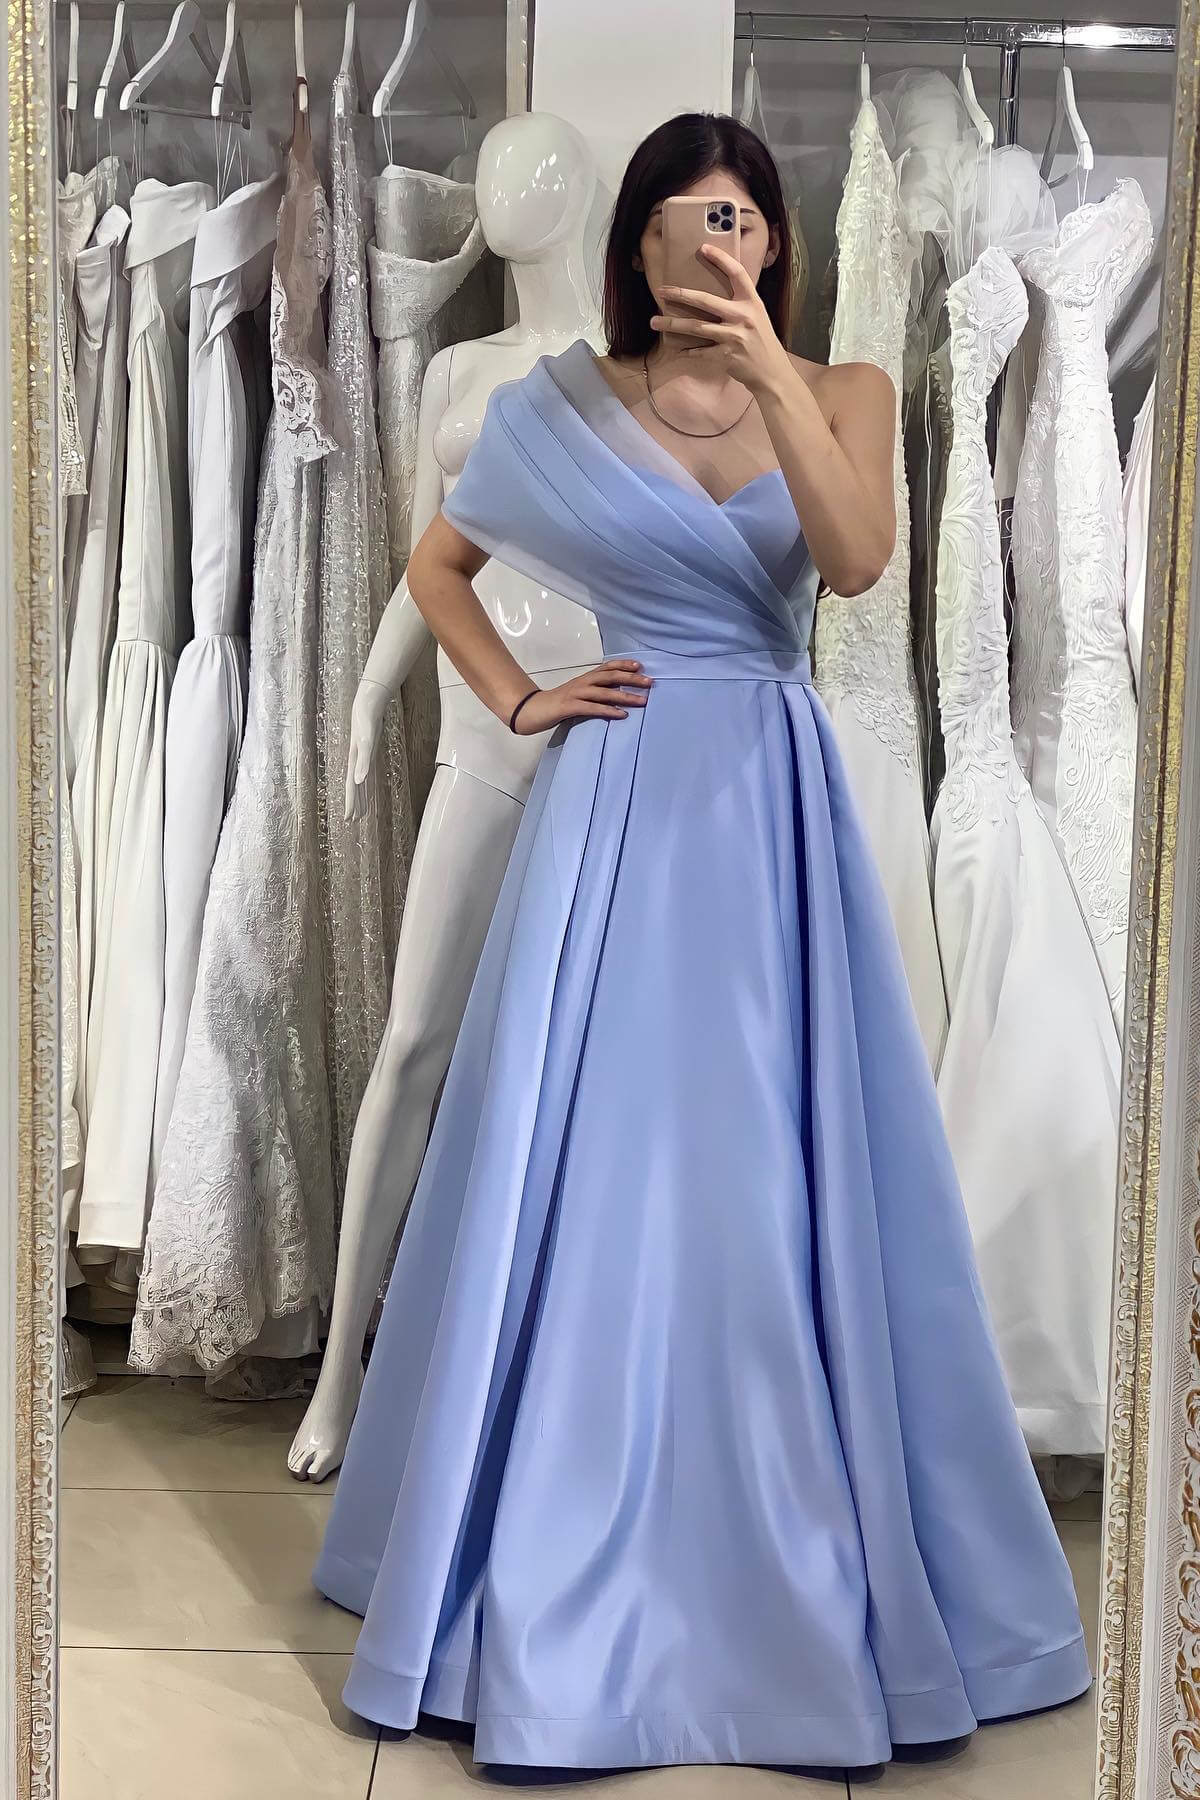 Chic Light Blue One Shoulder Sweetheart Sleeveless A-Line Evening Gown Online - lulusllly